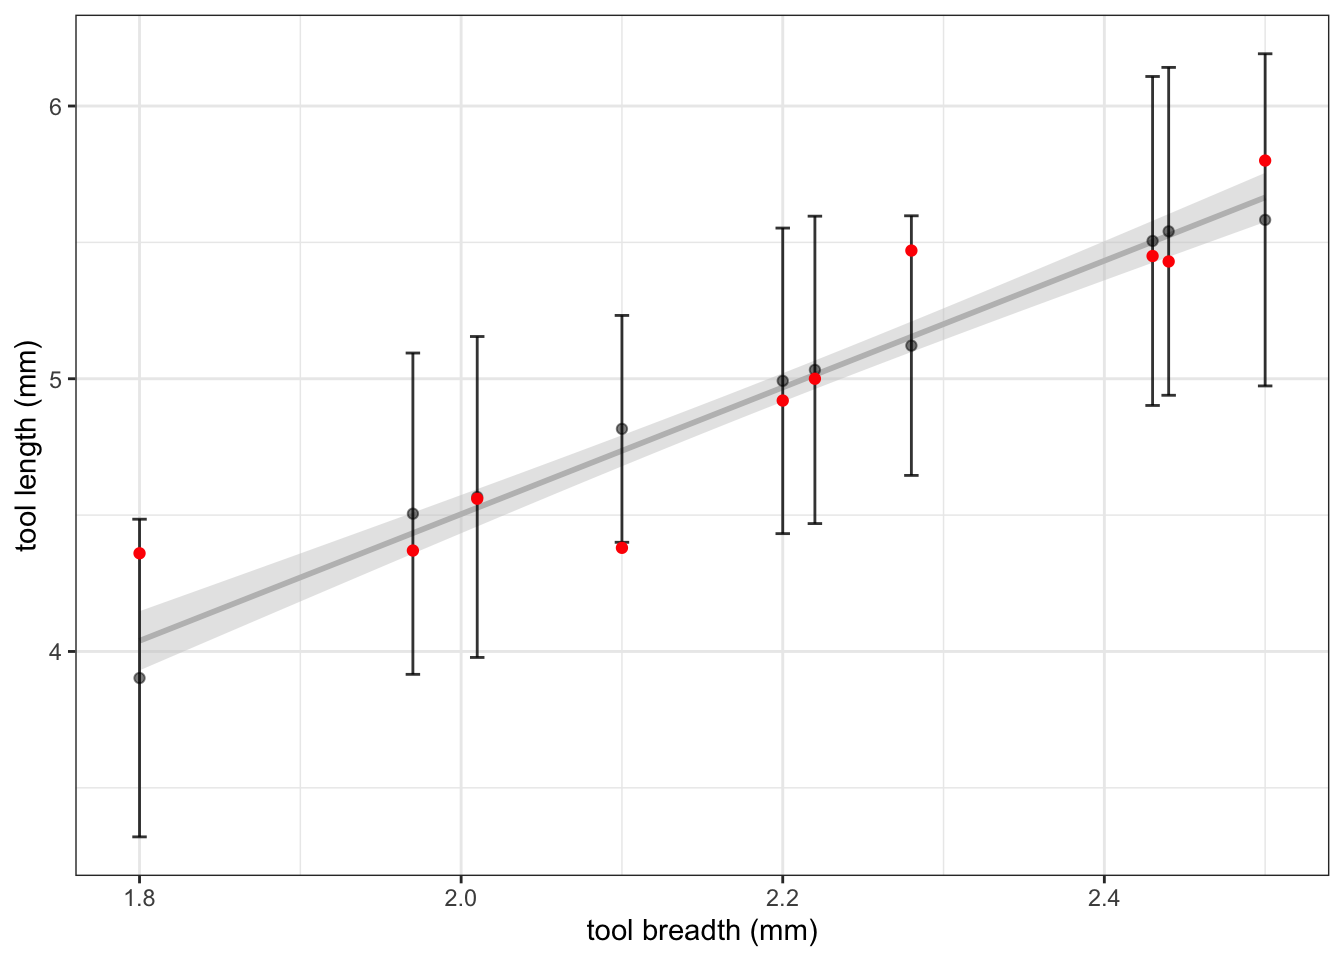 The results of cross-validation on the flint tools data. The observed data is shown in red. Predictions (black point) of the length, and intervals, are shown for each breadth measurement, obtained by removing that measurement from the training data. The regression line using all 10 observations is also included for comparison.